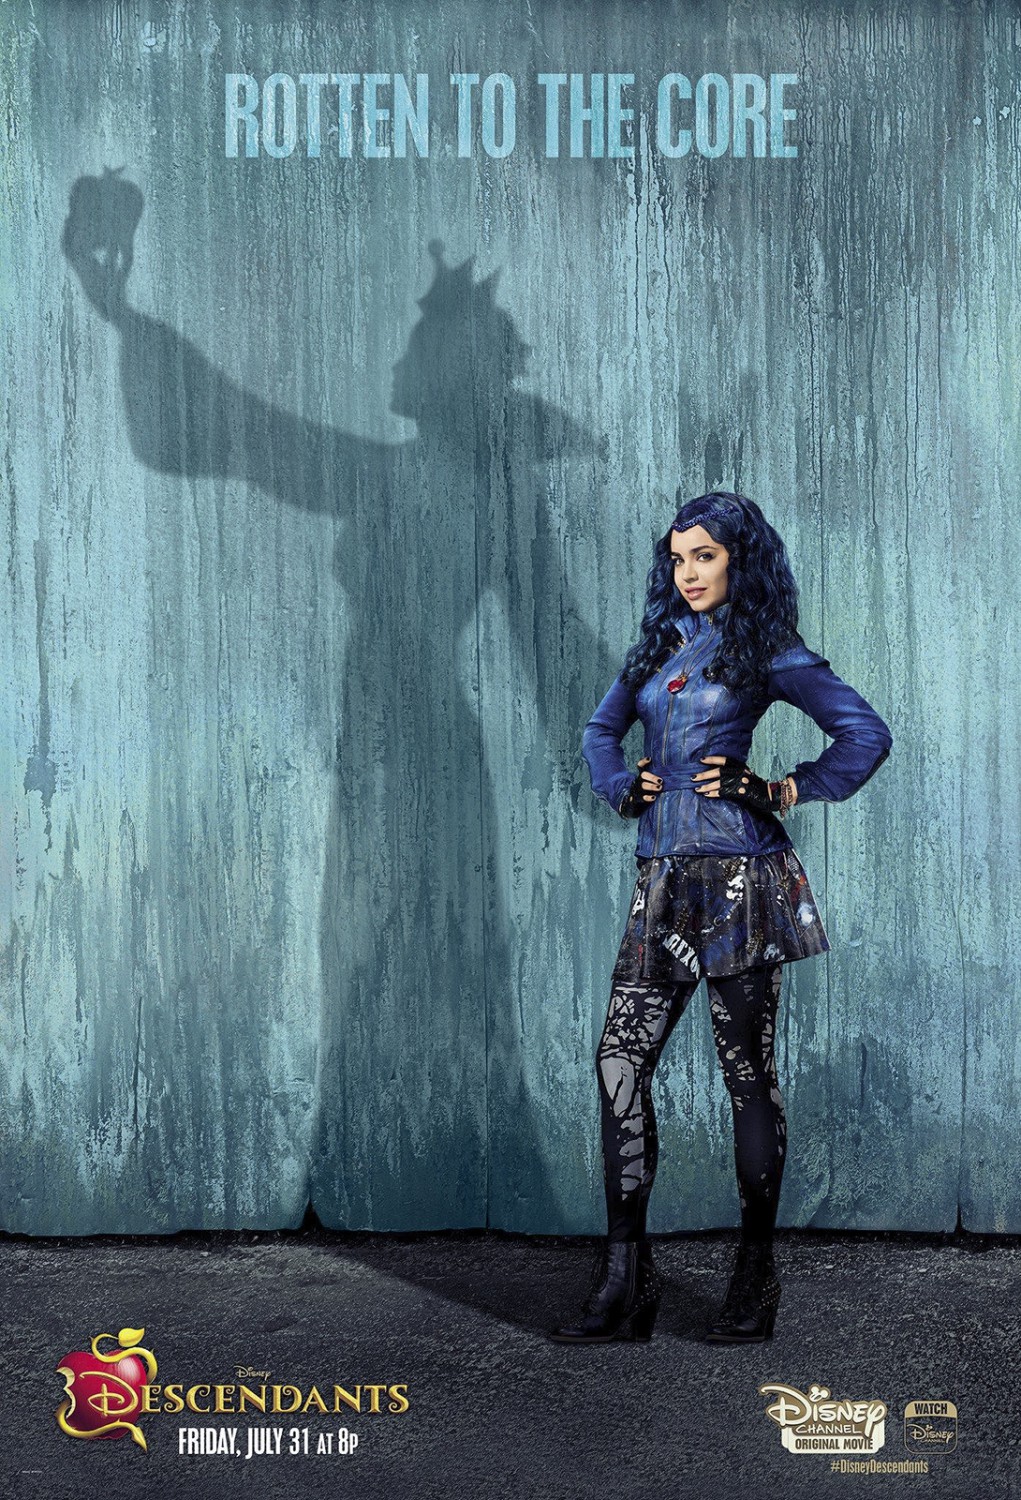 Extra Large TV Poster Image for Descendants (#5 of 5)